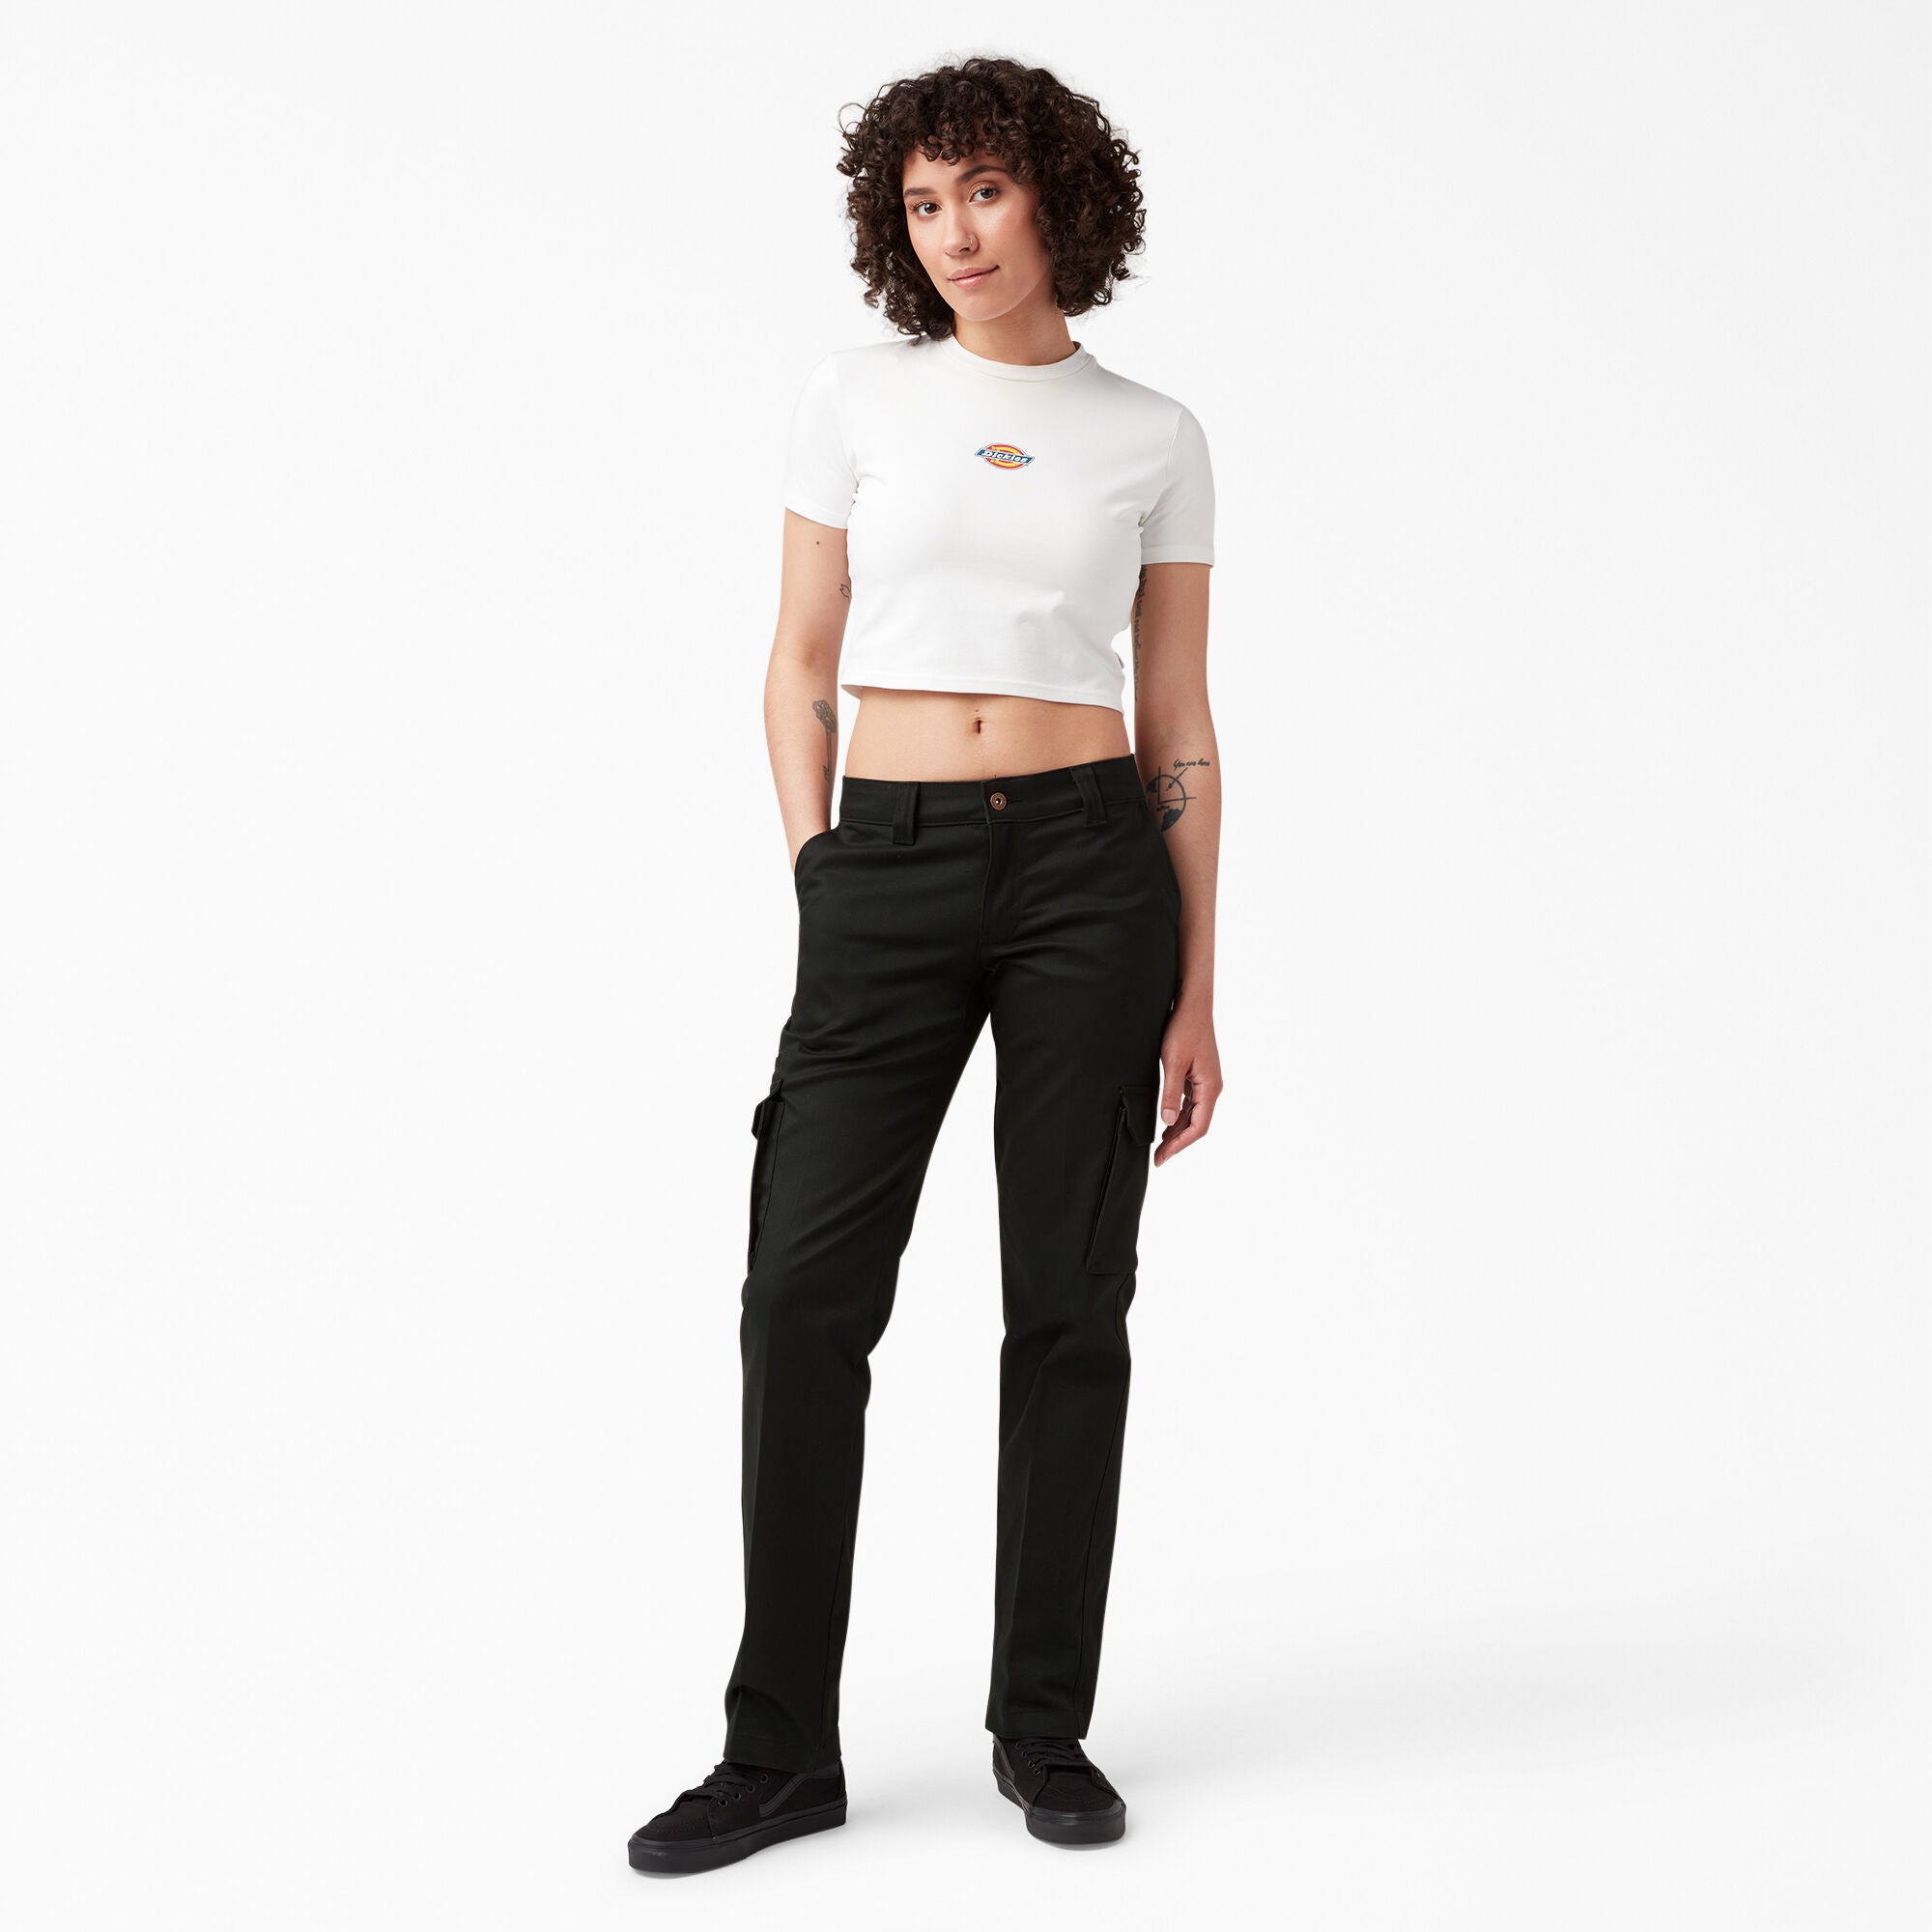 Dickies Women's Relaxed Fit Cargo Pant – Oregon Clothing Program Website